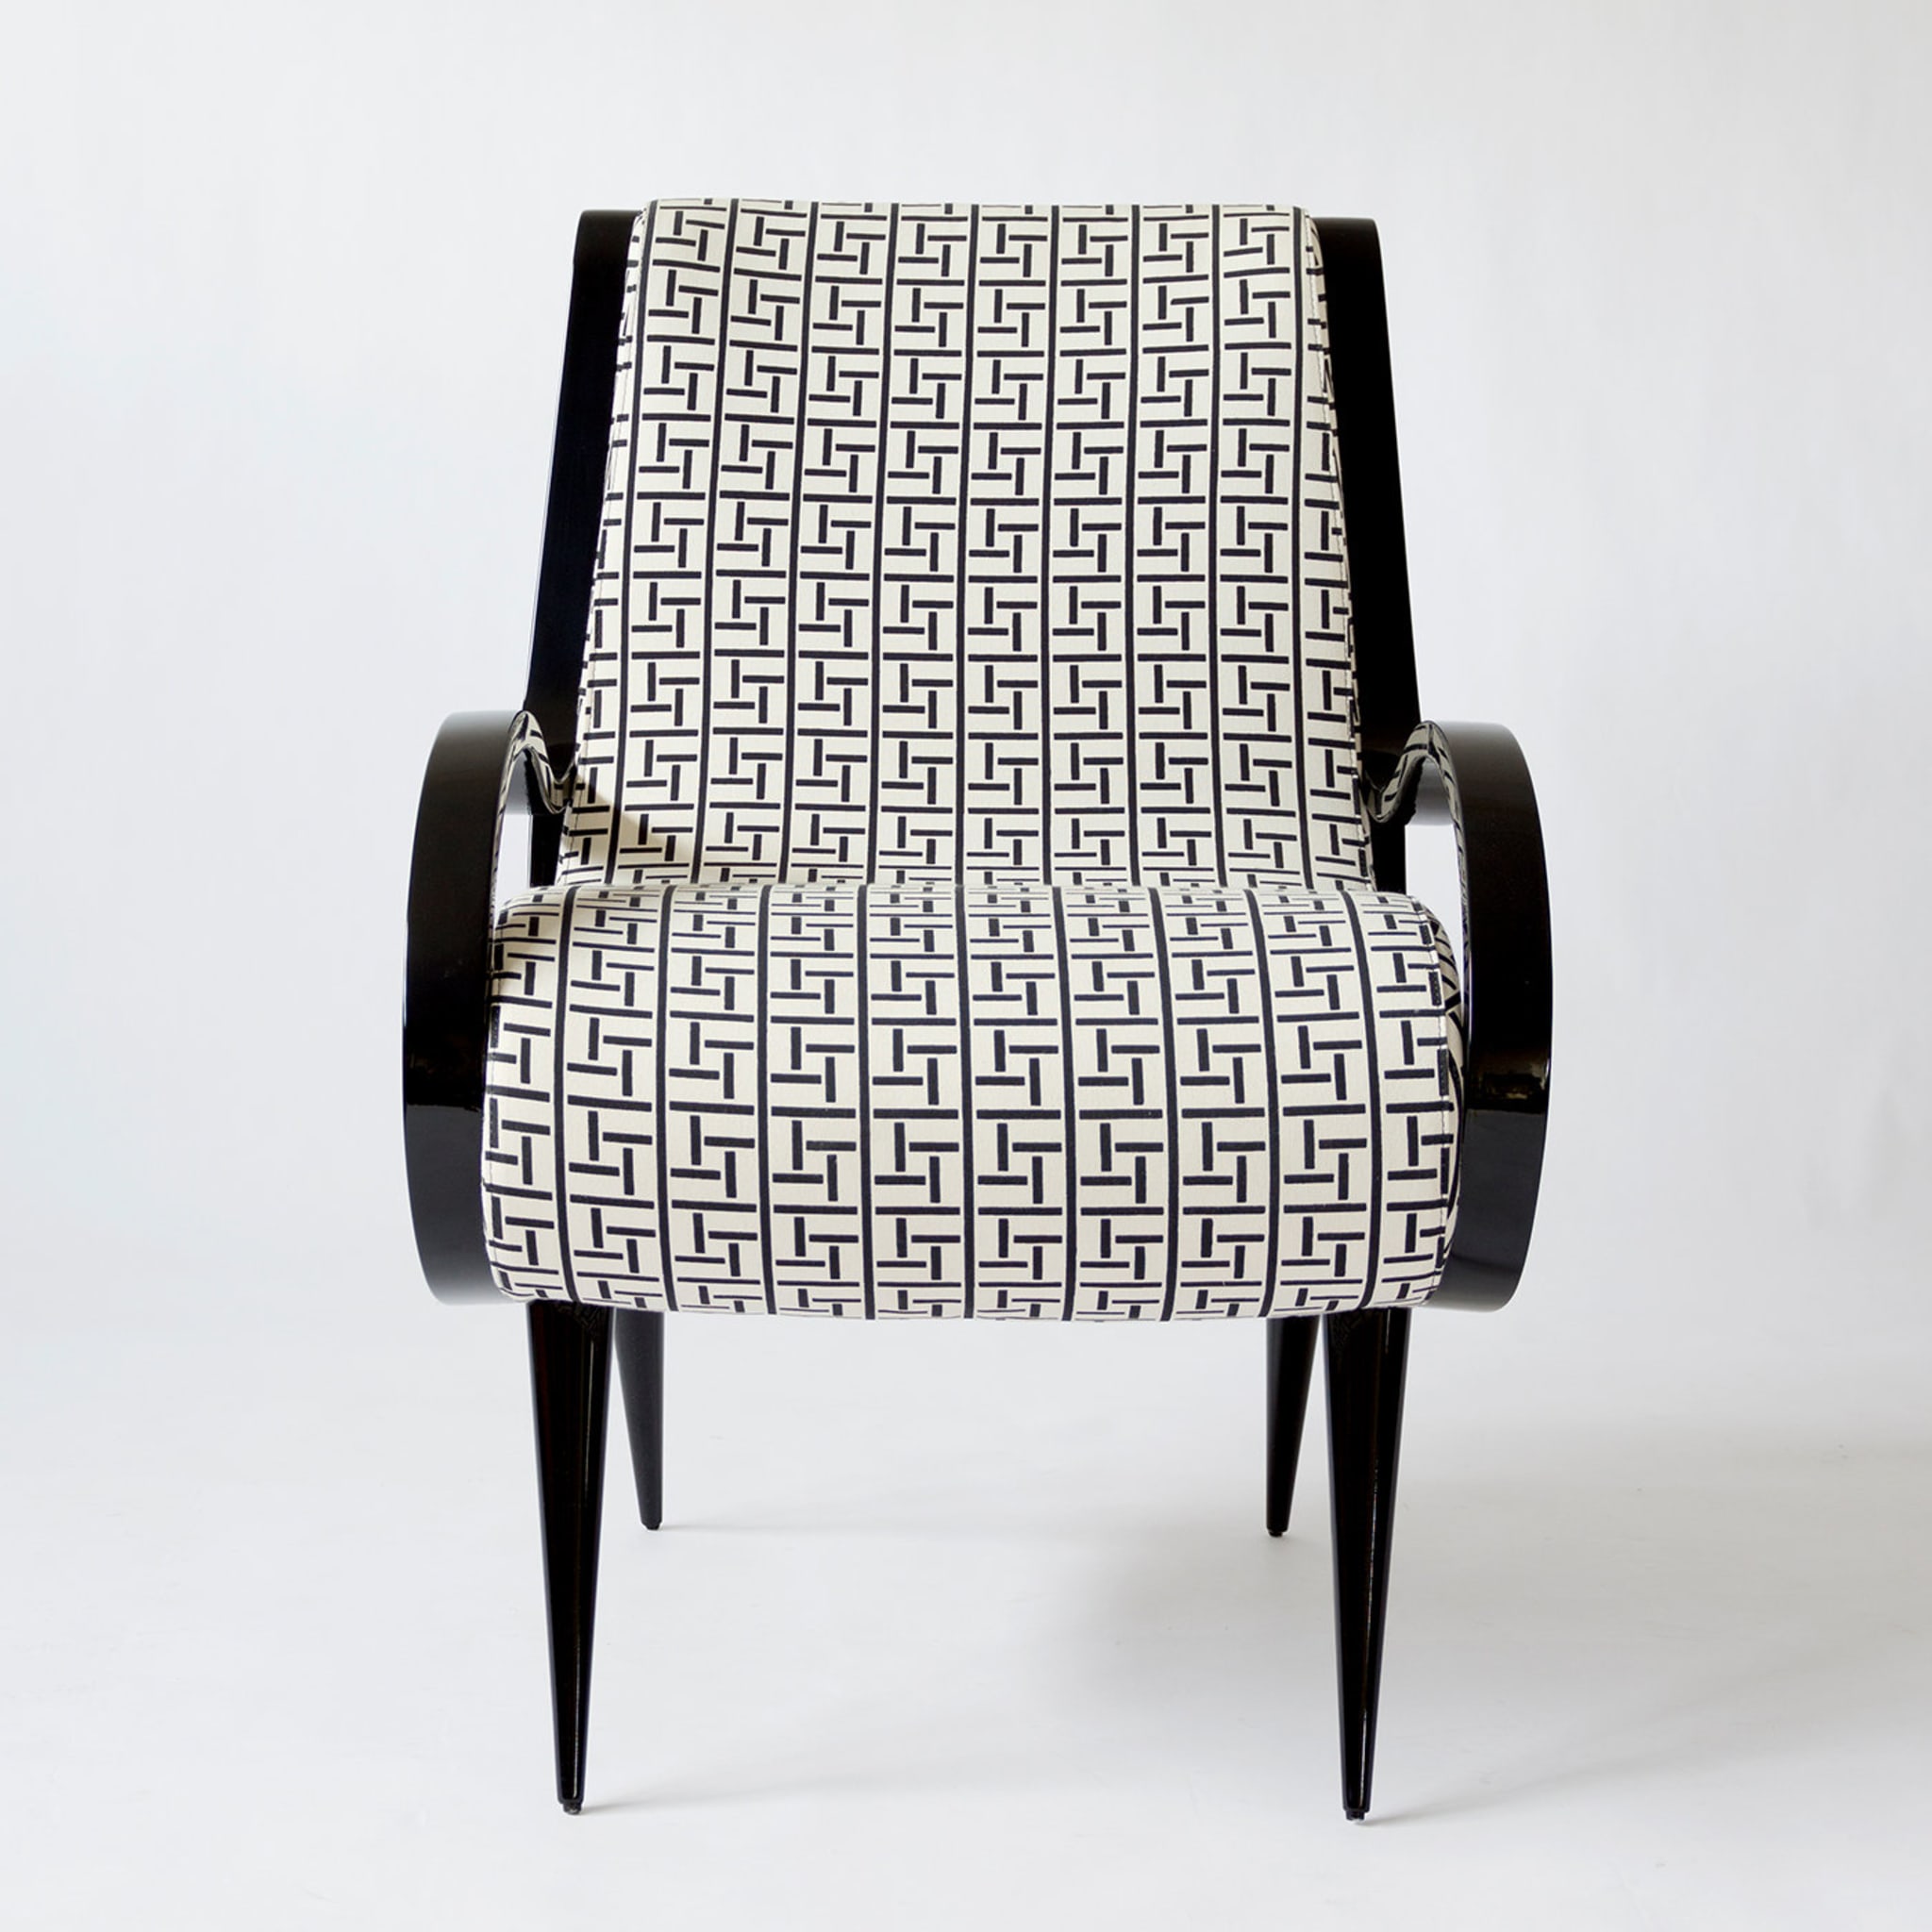 Eclipse armchair in black and white fabric - Alternative view 2